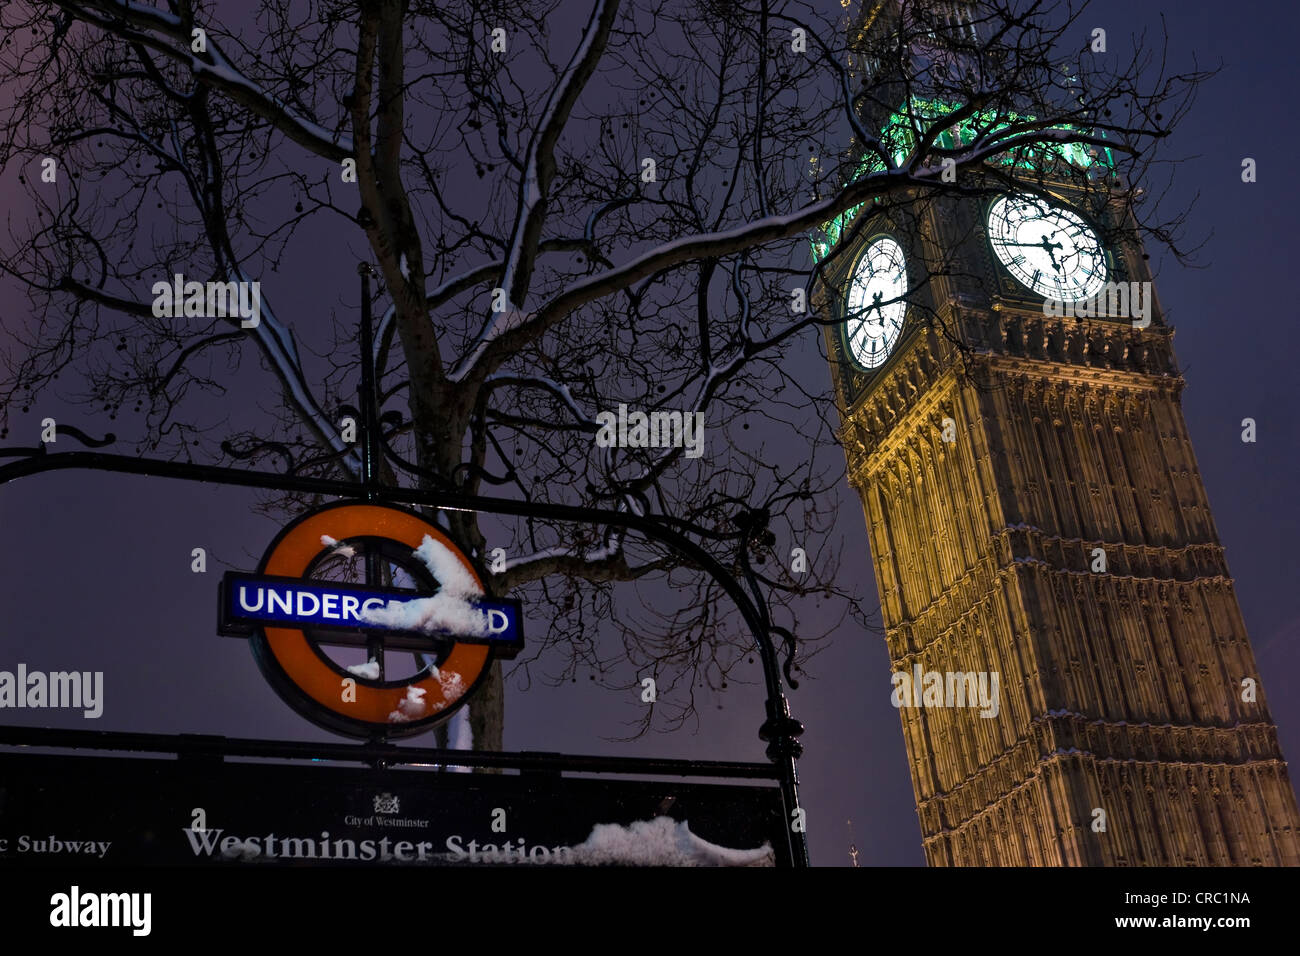 Big Ben clock tower and Westminster Tube Station sign, London, England, UK Stock Photo